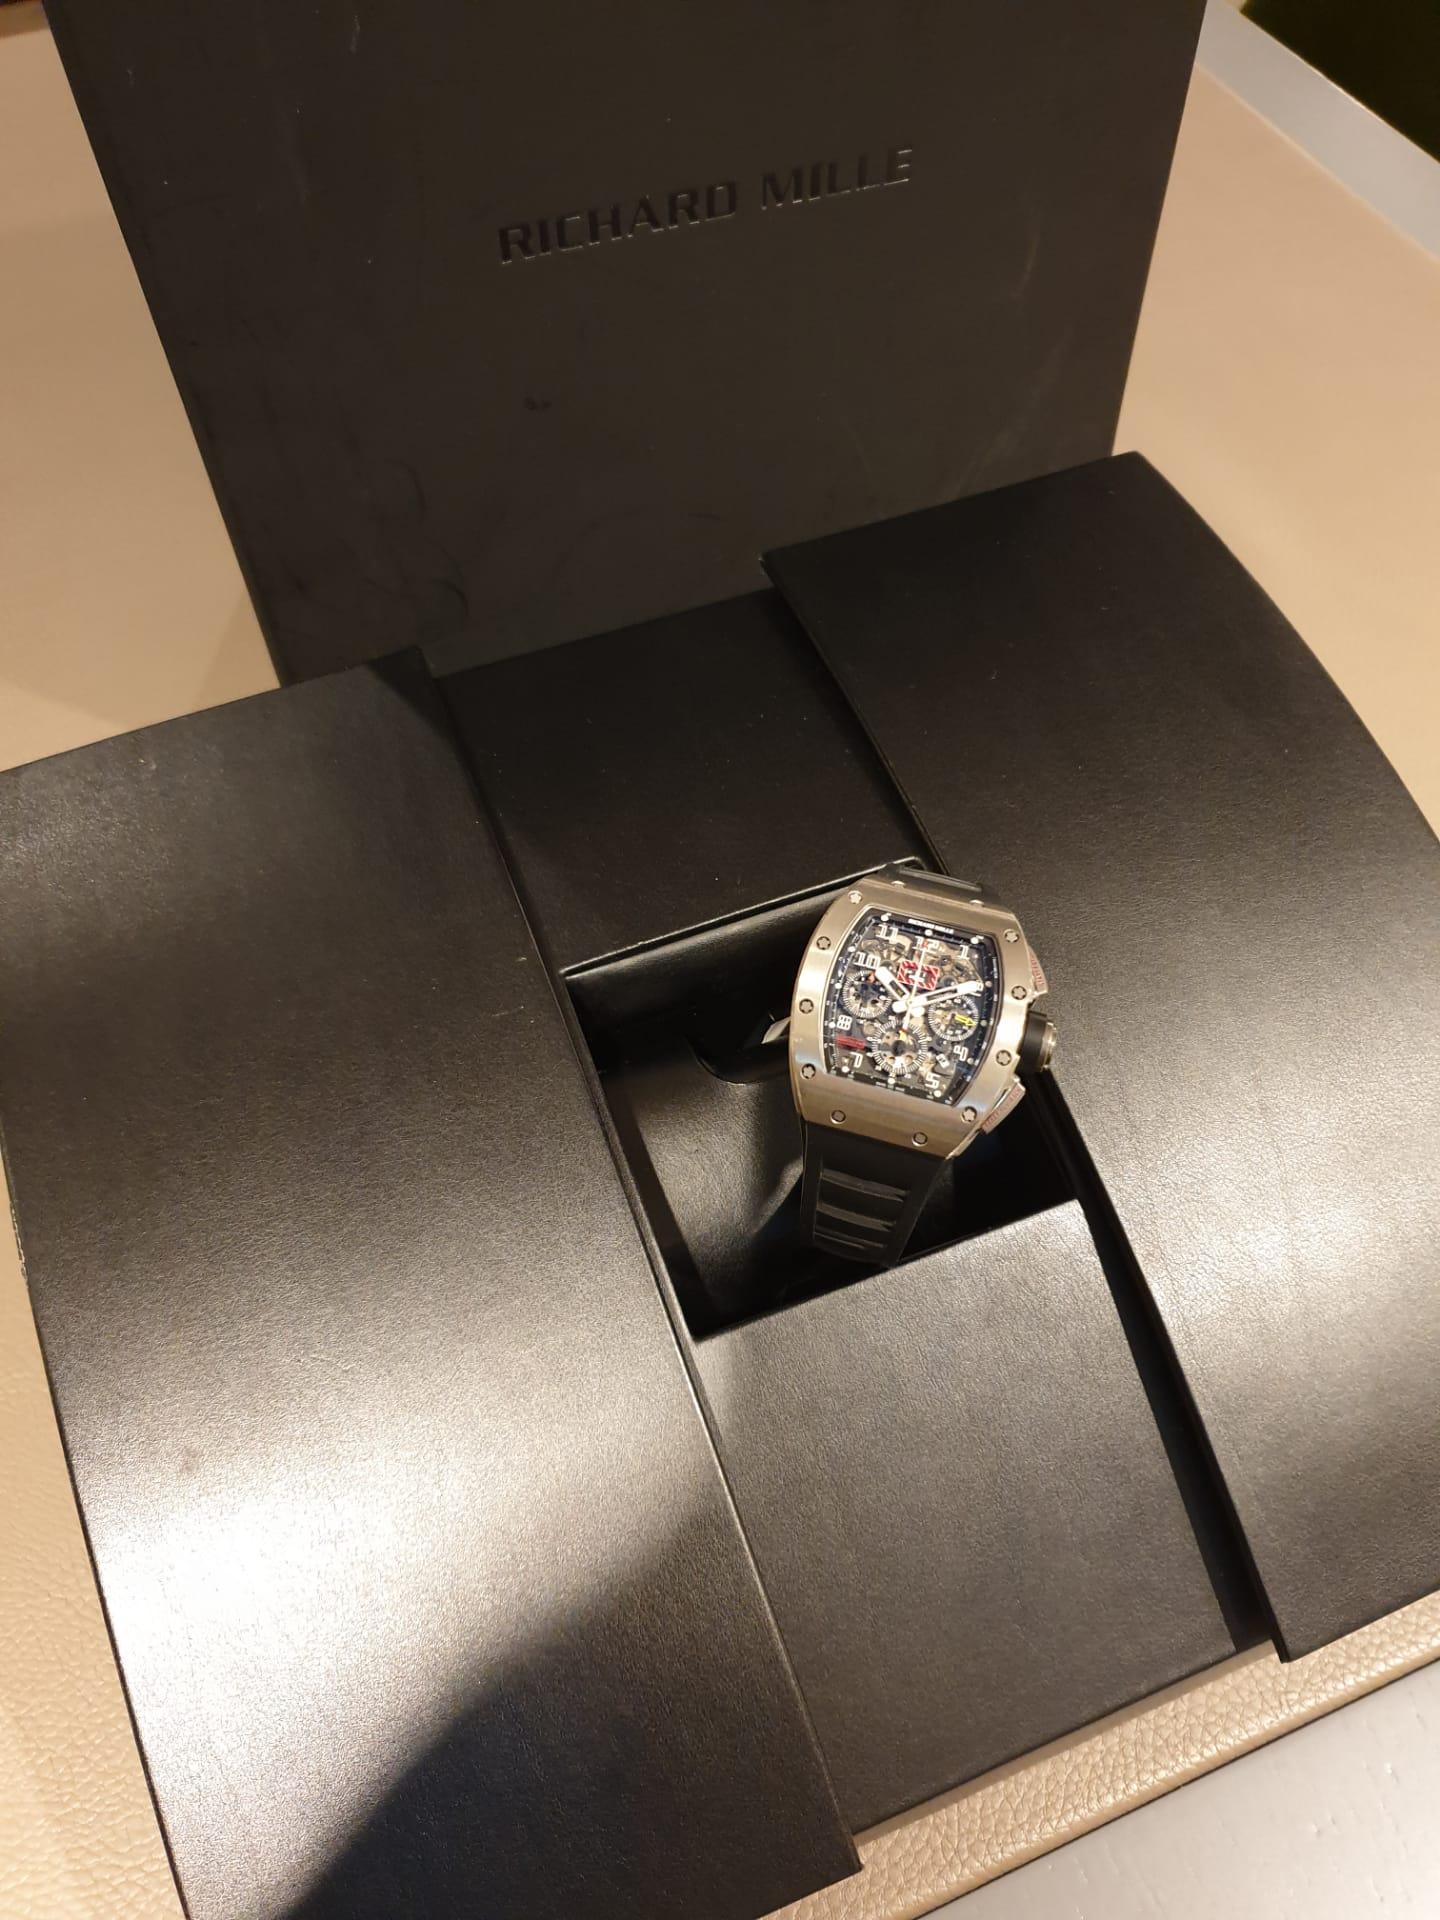 RICHARD MILLE
RM 011  TI FM
FELIPE MASSA - TITANIUM
FLYBACK CHRONOGRAPH

This Richard Mille RM011 Felipe Massa in titanium is named after Felipe Massa, who has achieved 40 podiums in his career and the first sporting figure to have joined the